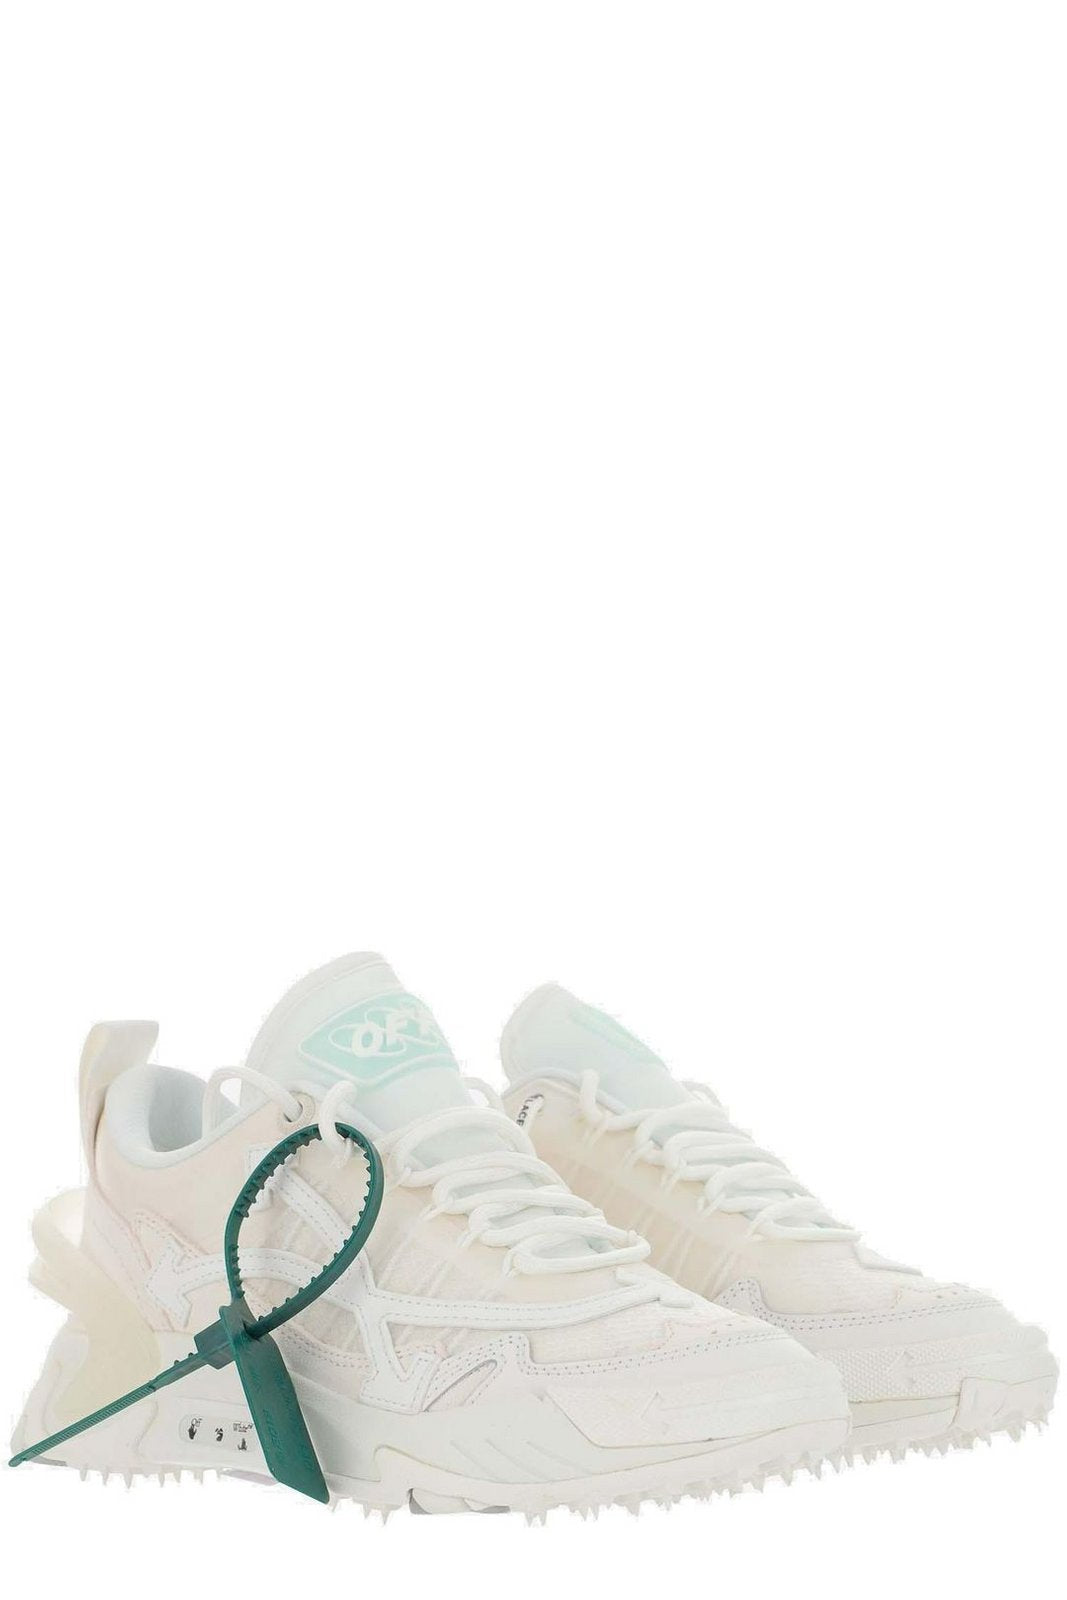 Off-White Odsy 2000 Lace-Up Sneakers